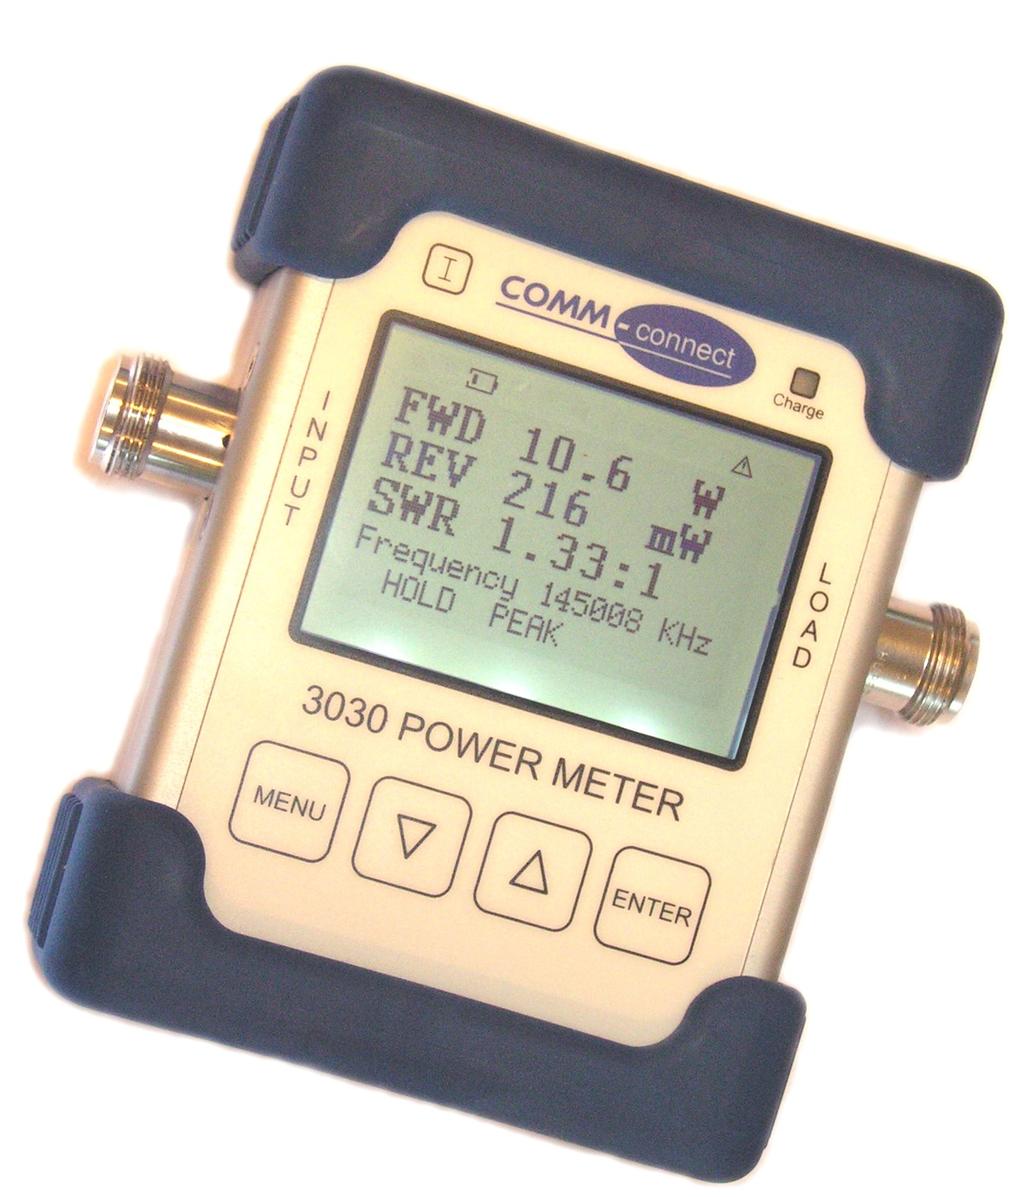 Another great product from COMM-connect: PMR Power Meter Type